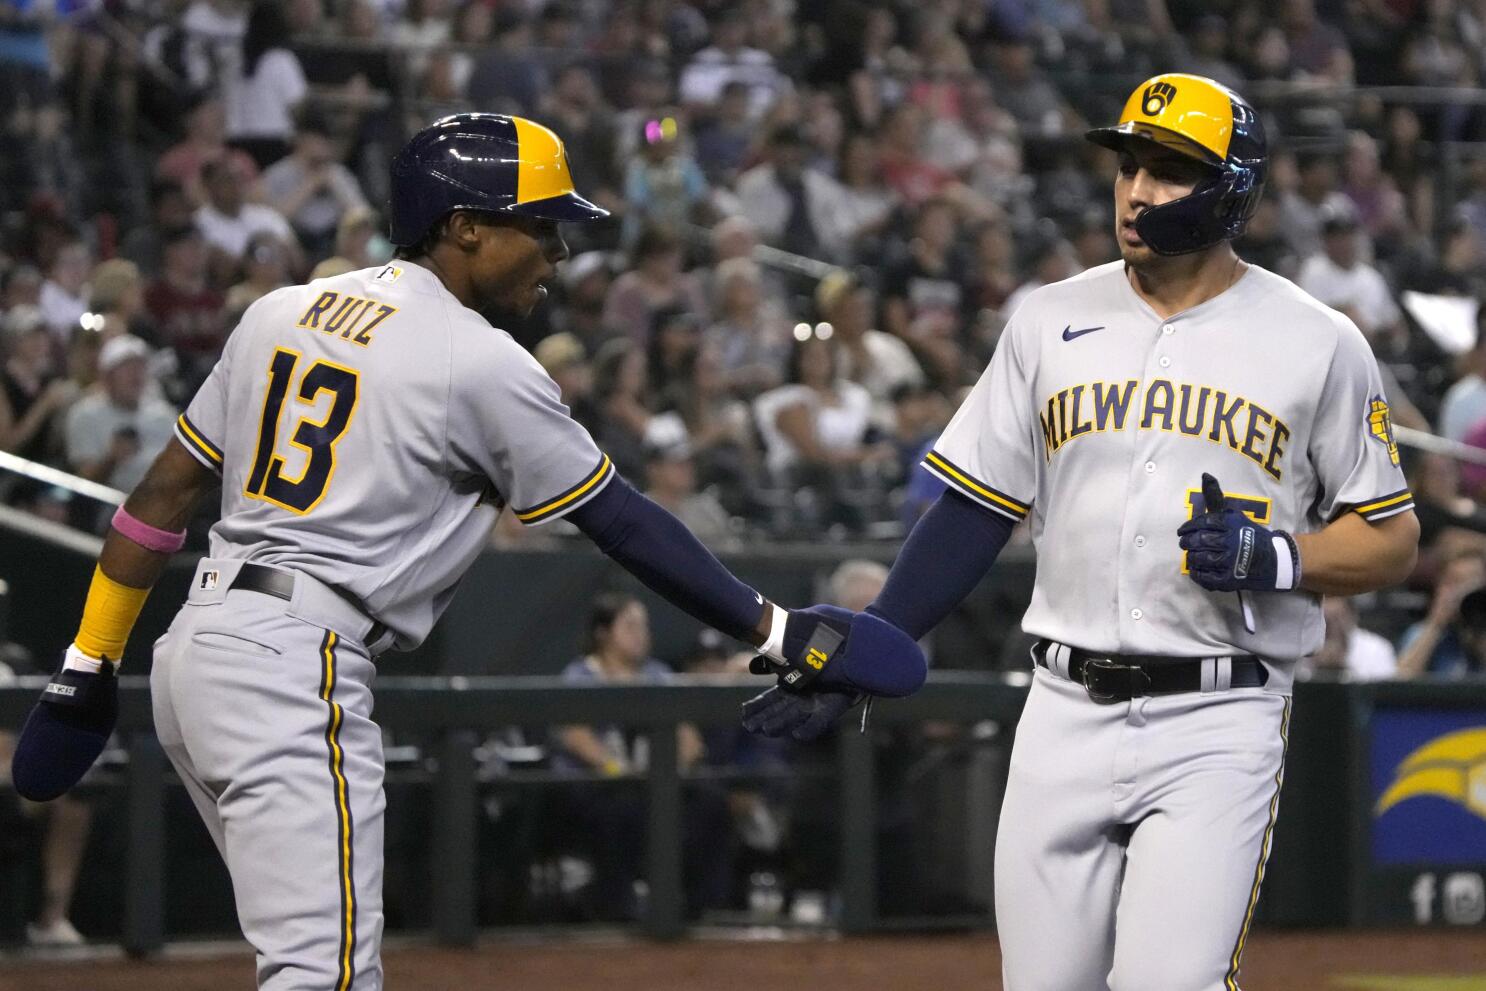 The Milwaukee Brewers score two runs on a pair of fielder's choice